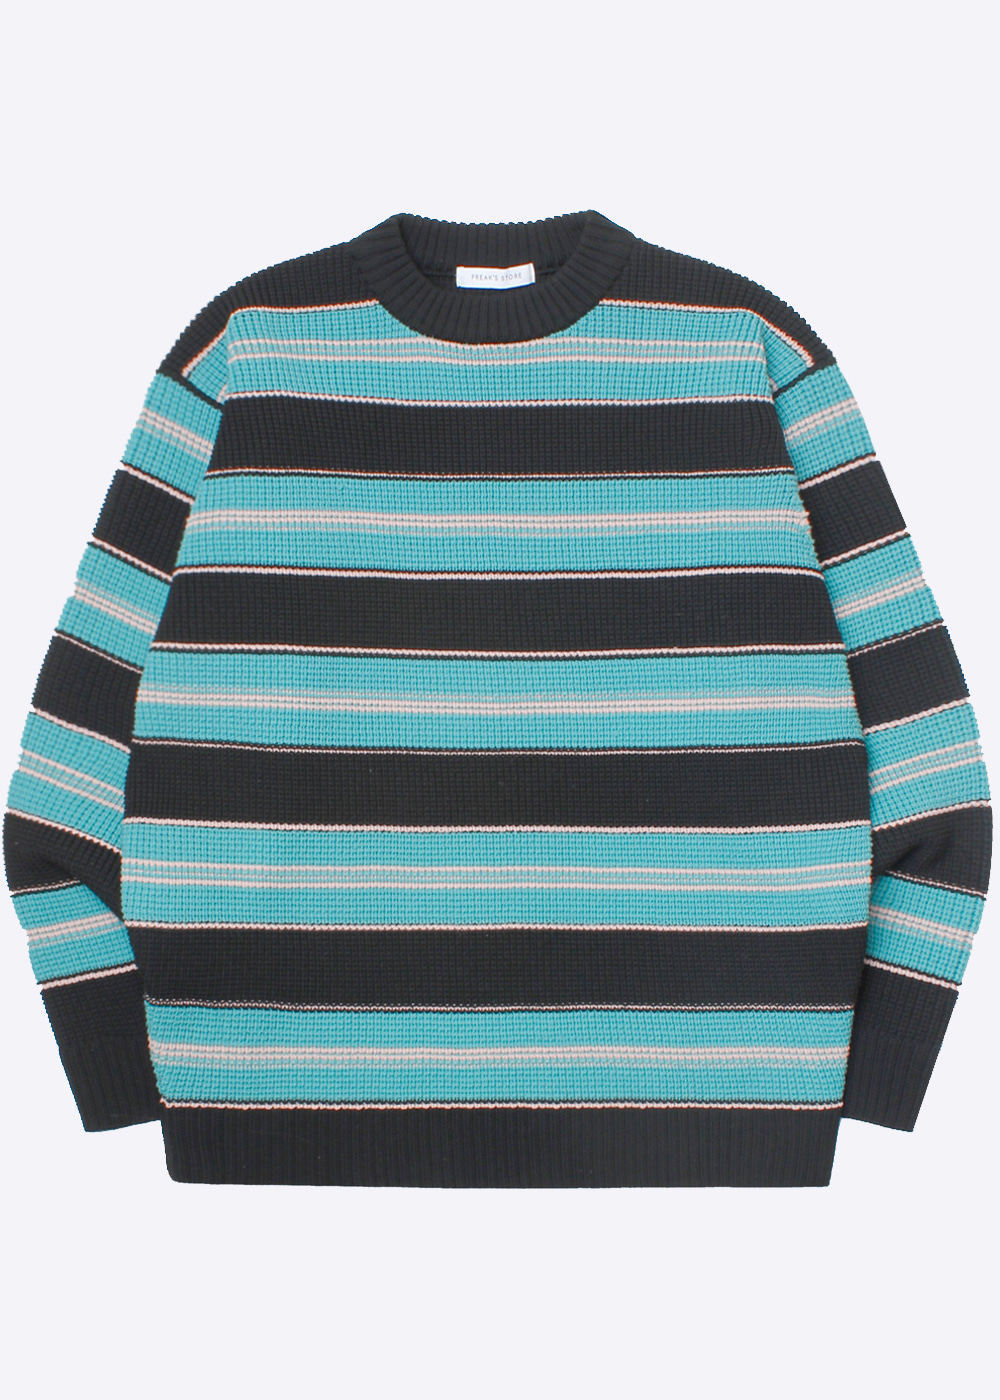 FREAK’S STORE‘over fit’ poly knit sweater